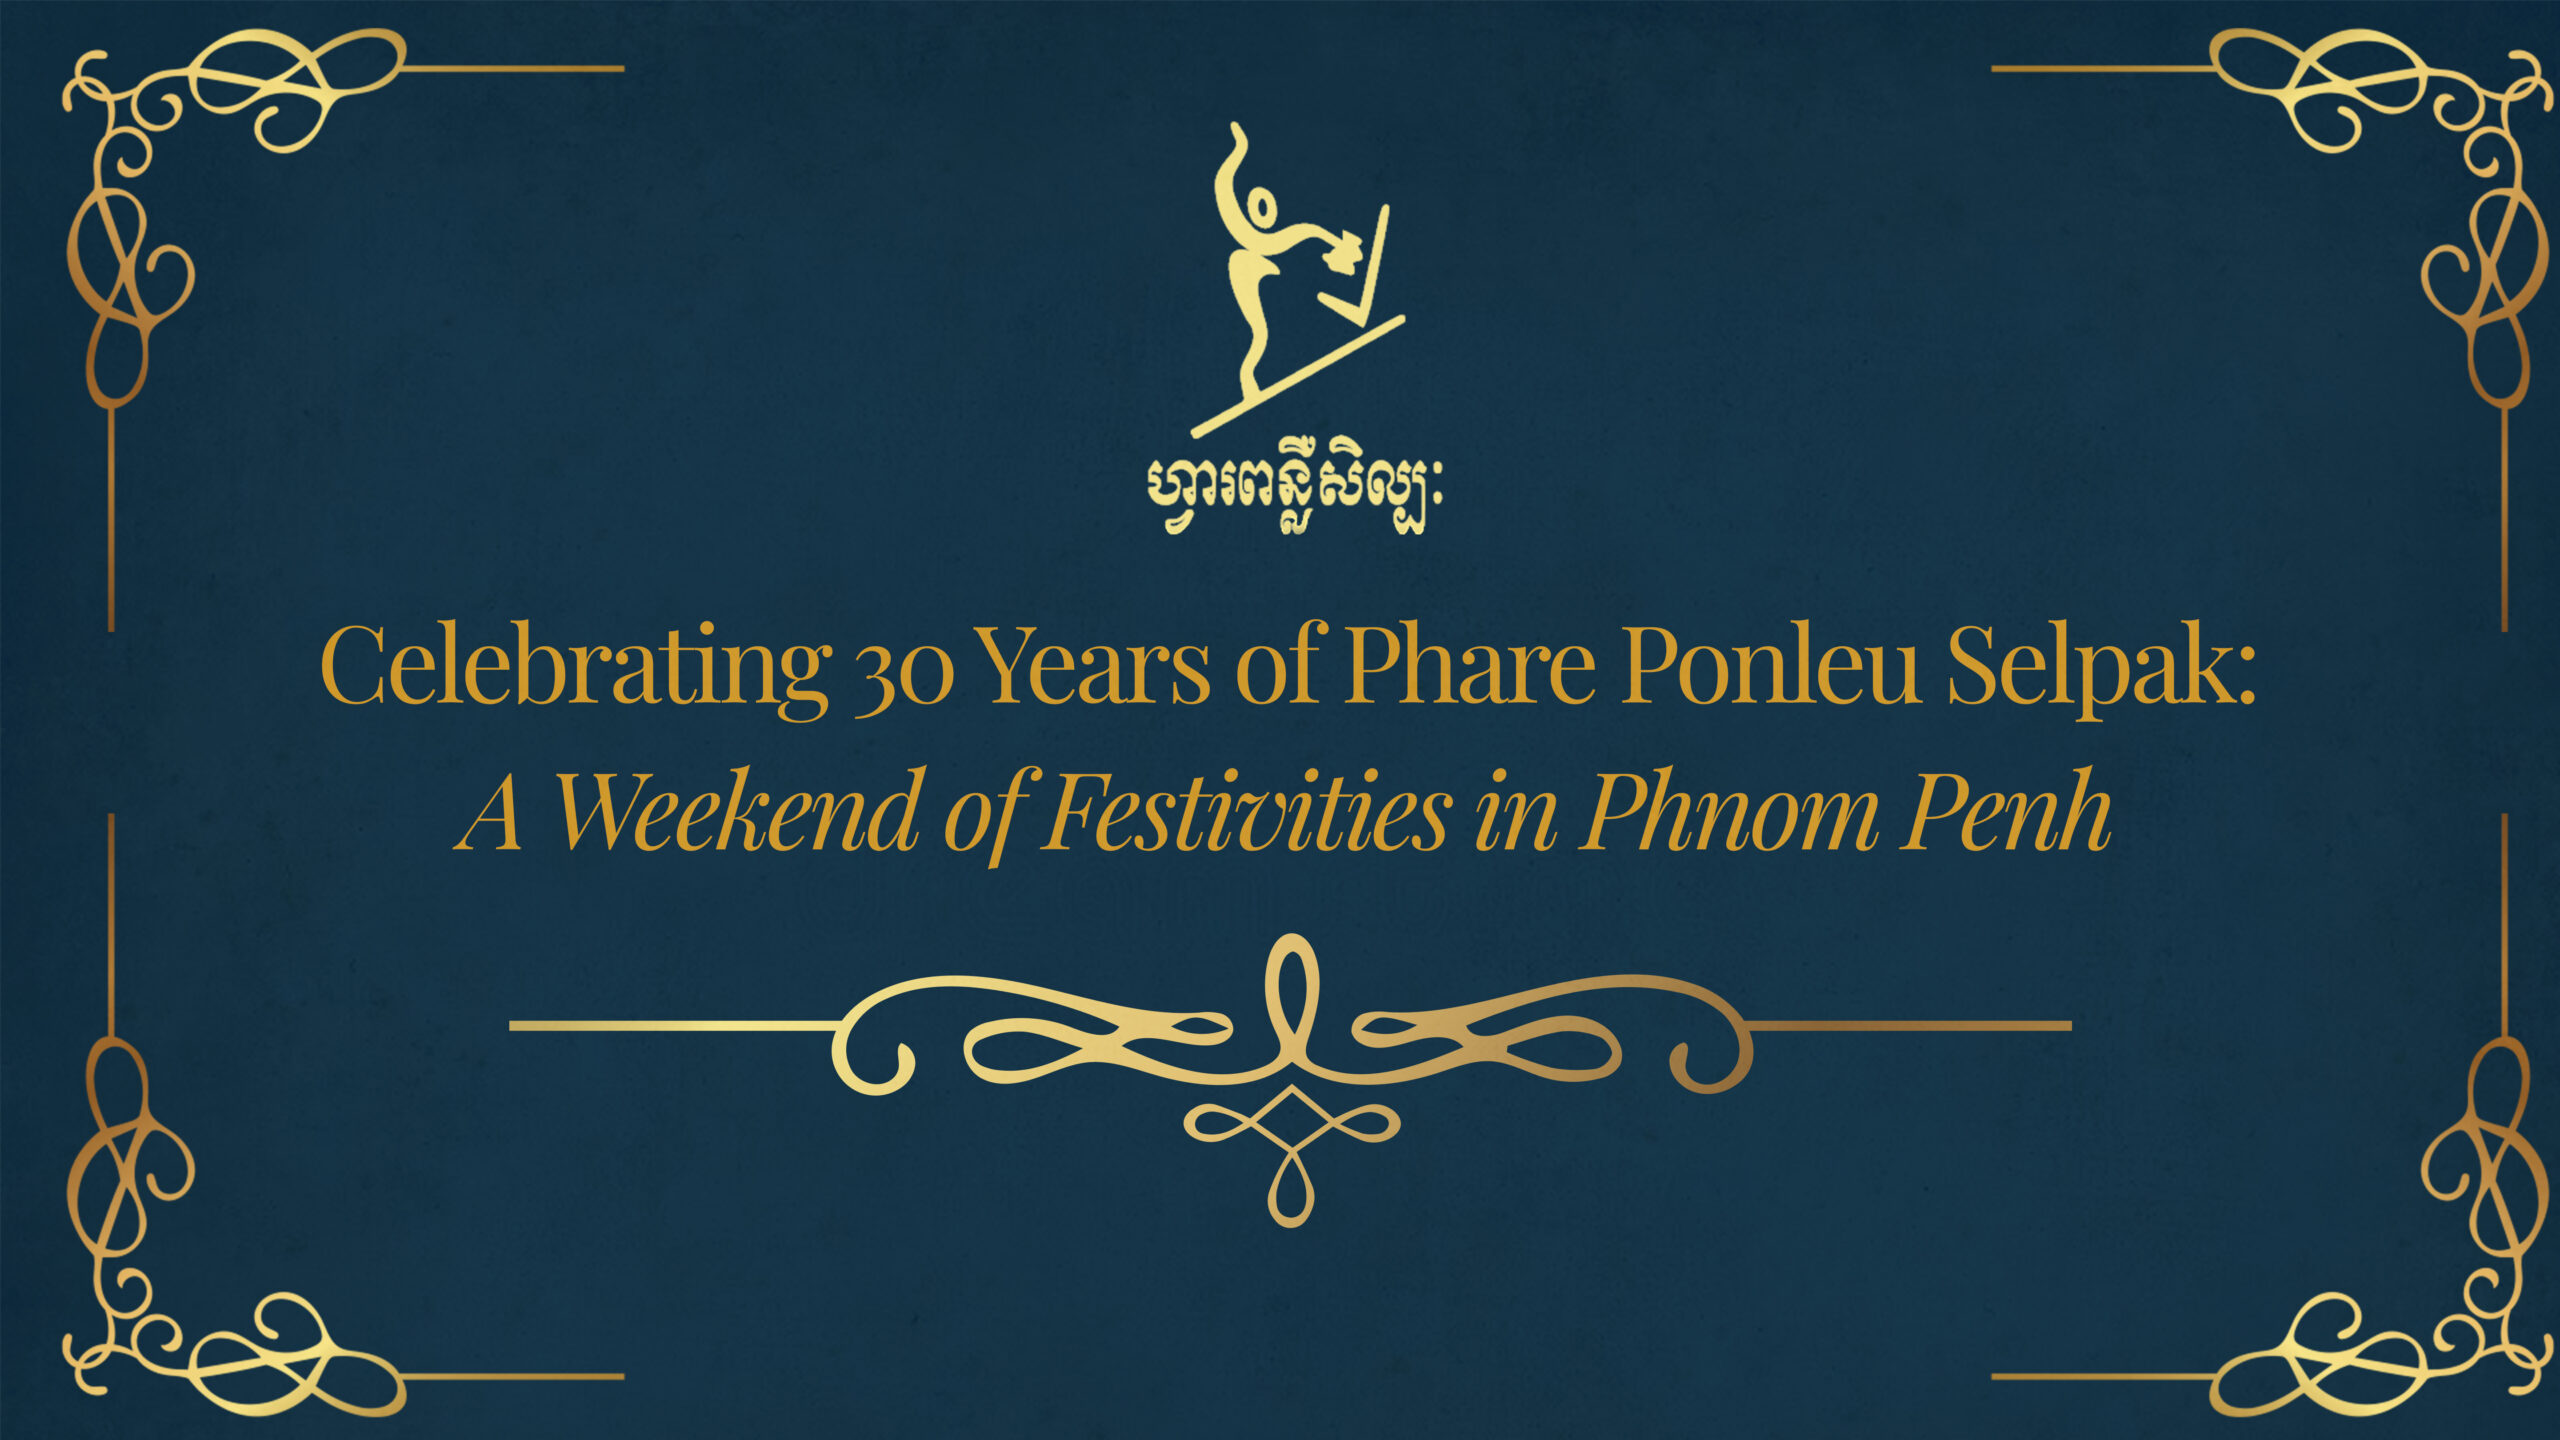 Come celebrate the 30th anniversary of Phare Ponleu Selpak in Phnom Penh during 1-3 March 2024